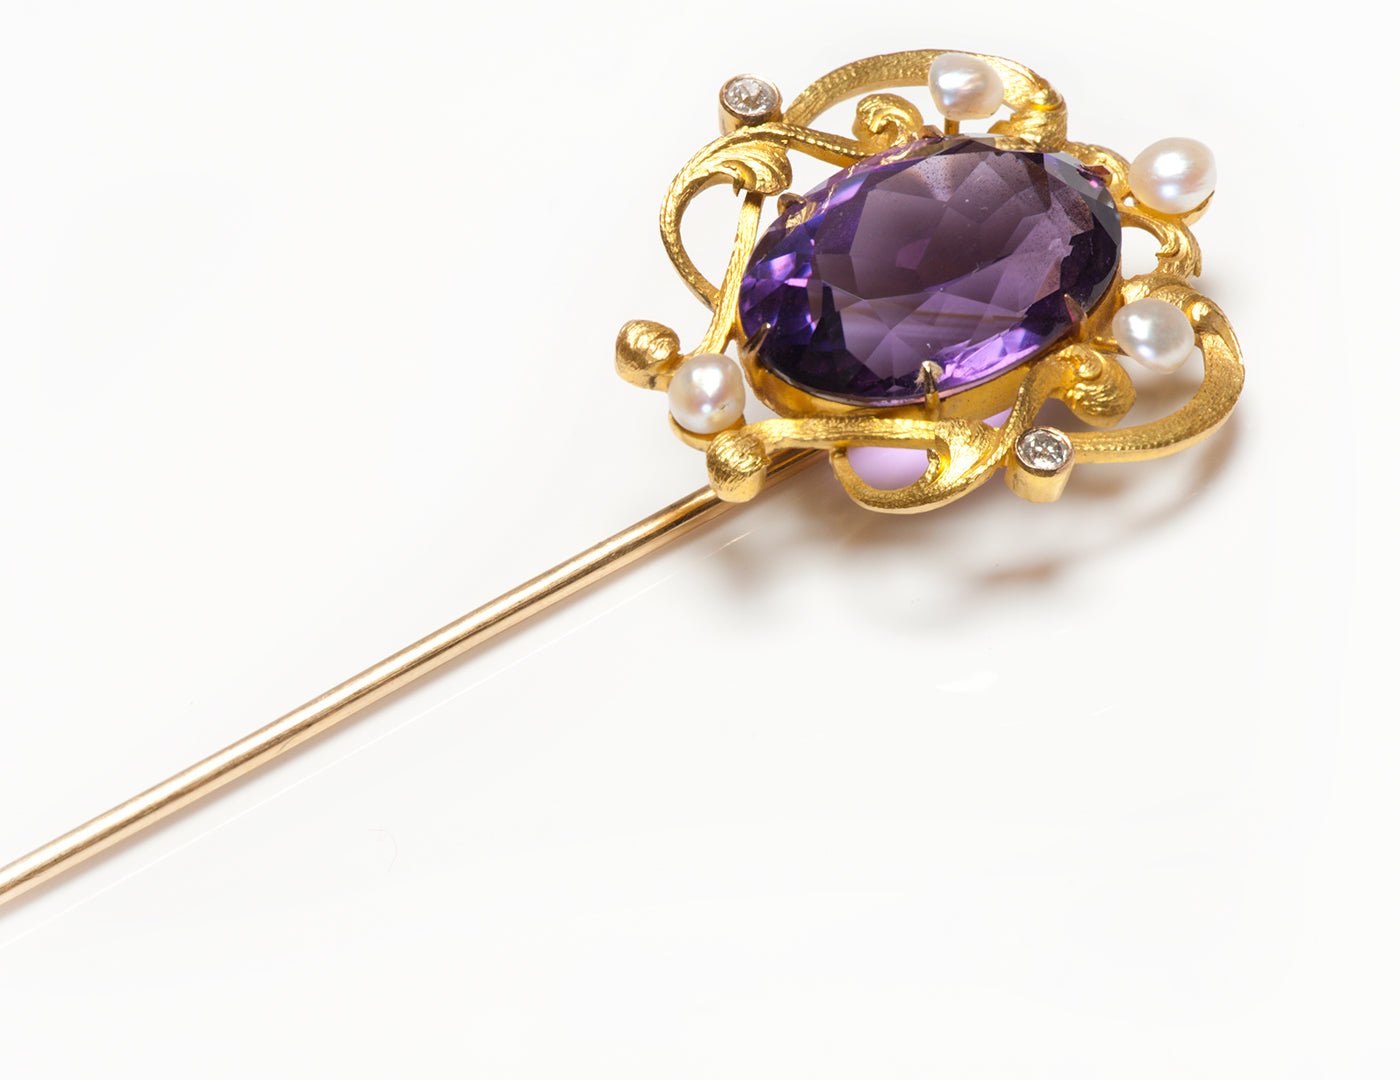 Antique Gold Amethyst Pearl Diamond Hat Pin - DSF Antique Jewelry